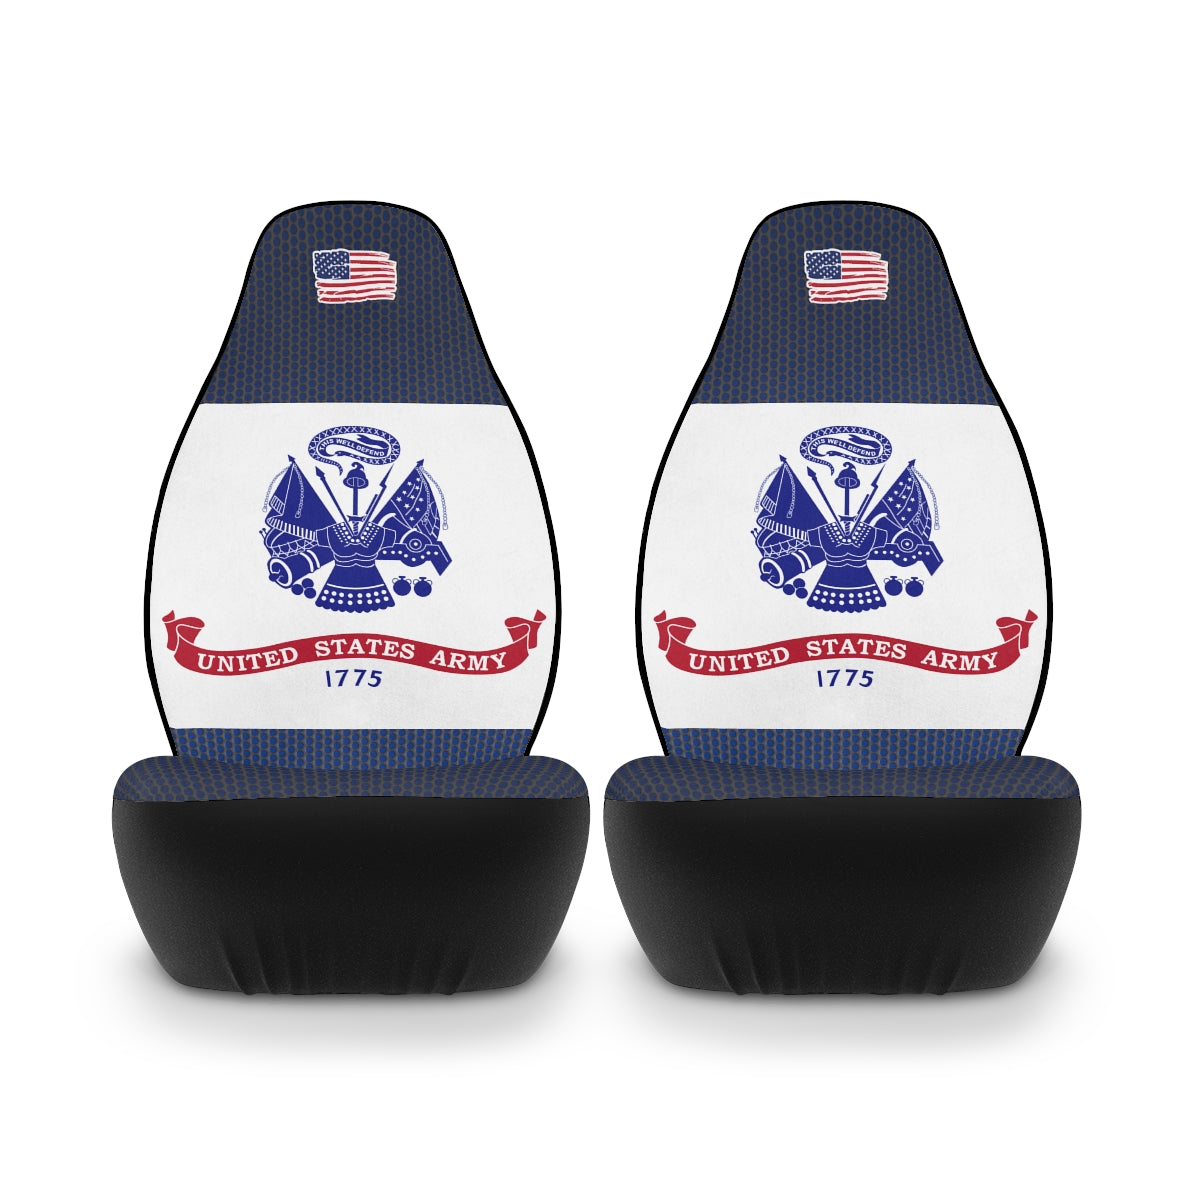 U.S. Army Dark Blue Polyester Car Seat Covers